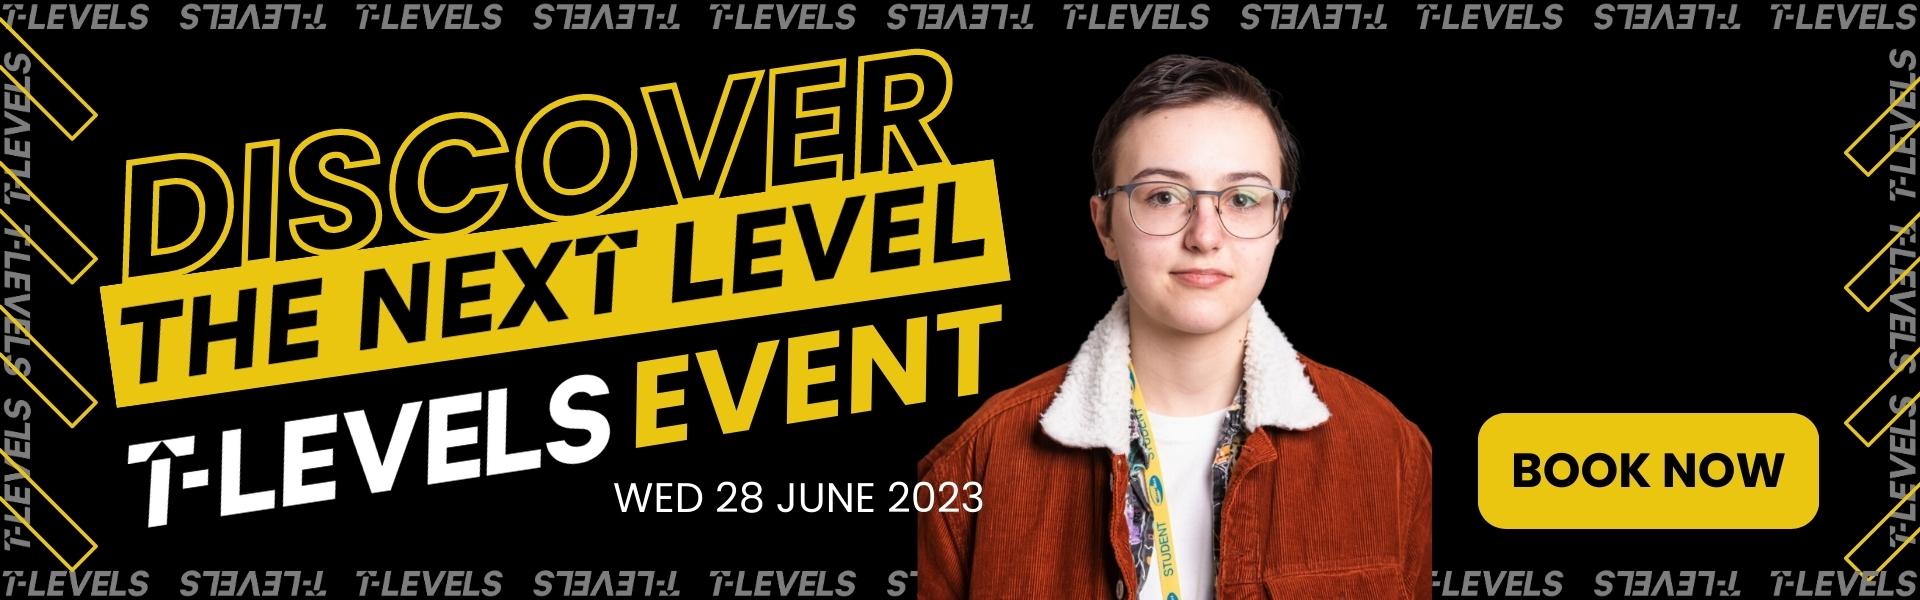 Discover T-Levels Banner